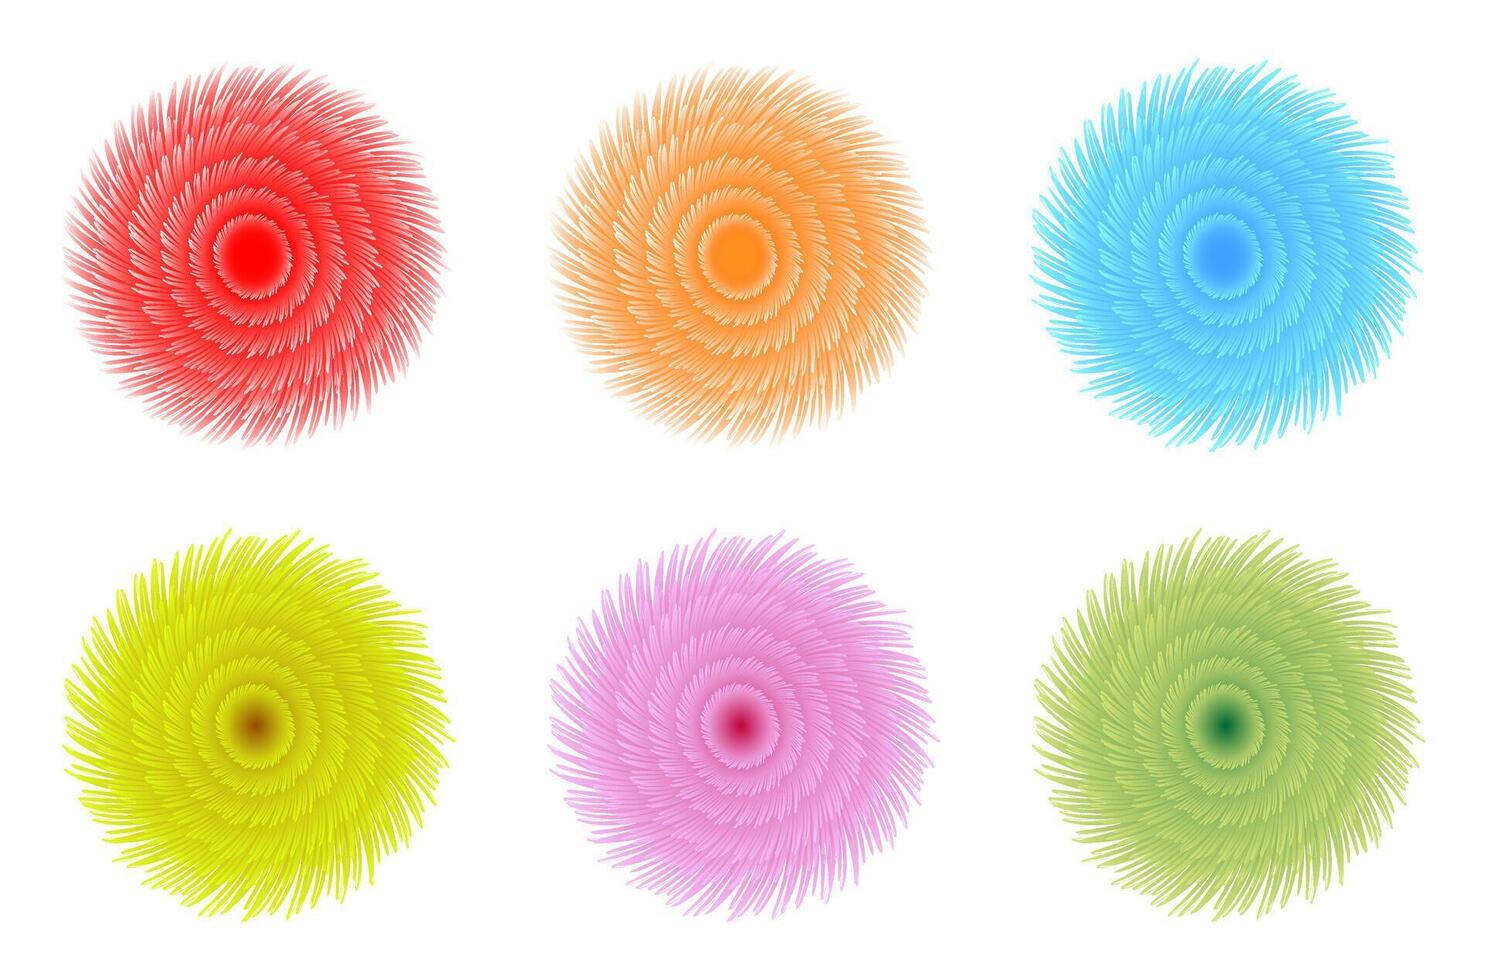 Abstract flower-shaped shapes with a gradient, for use in graphic design vector